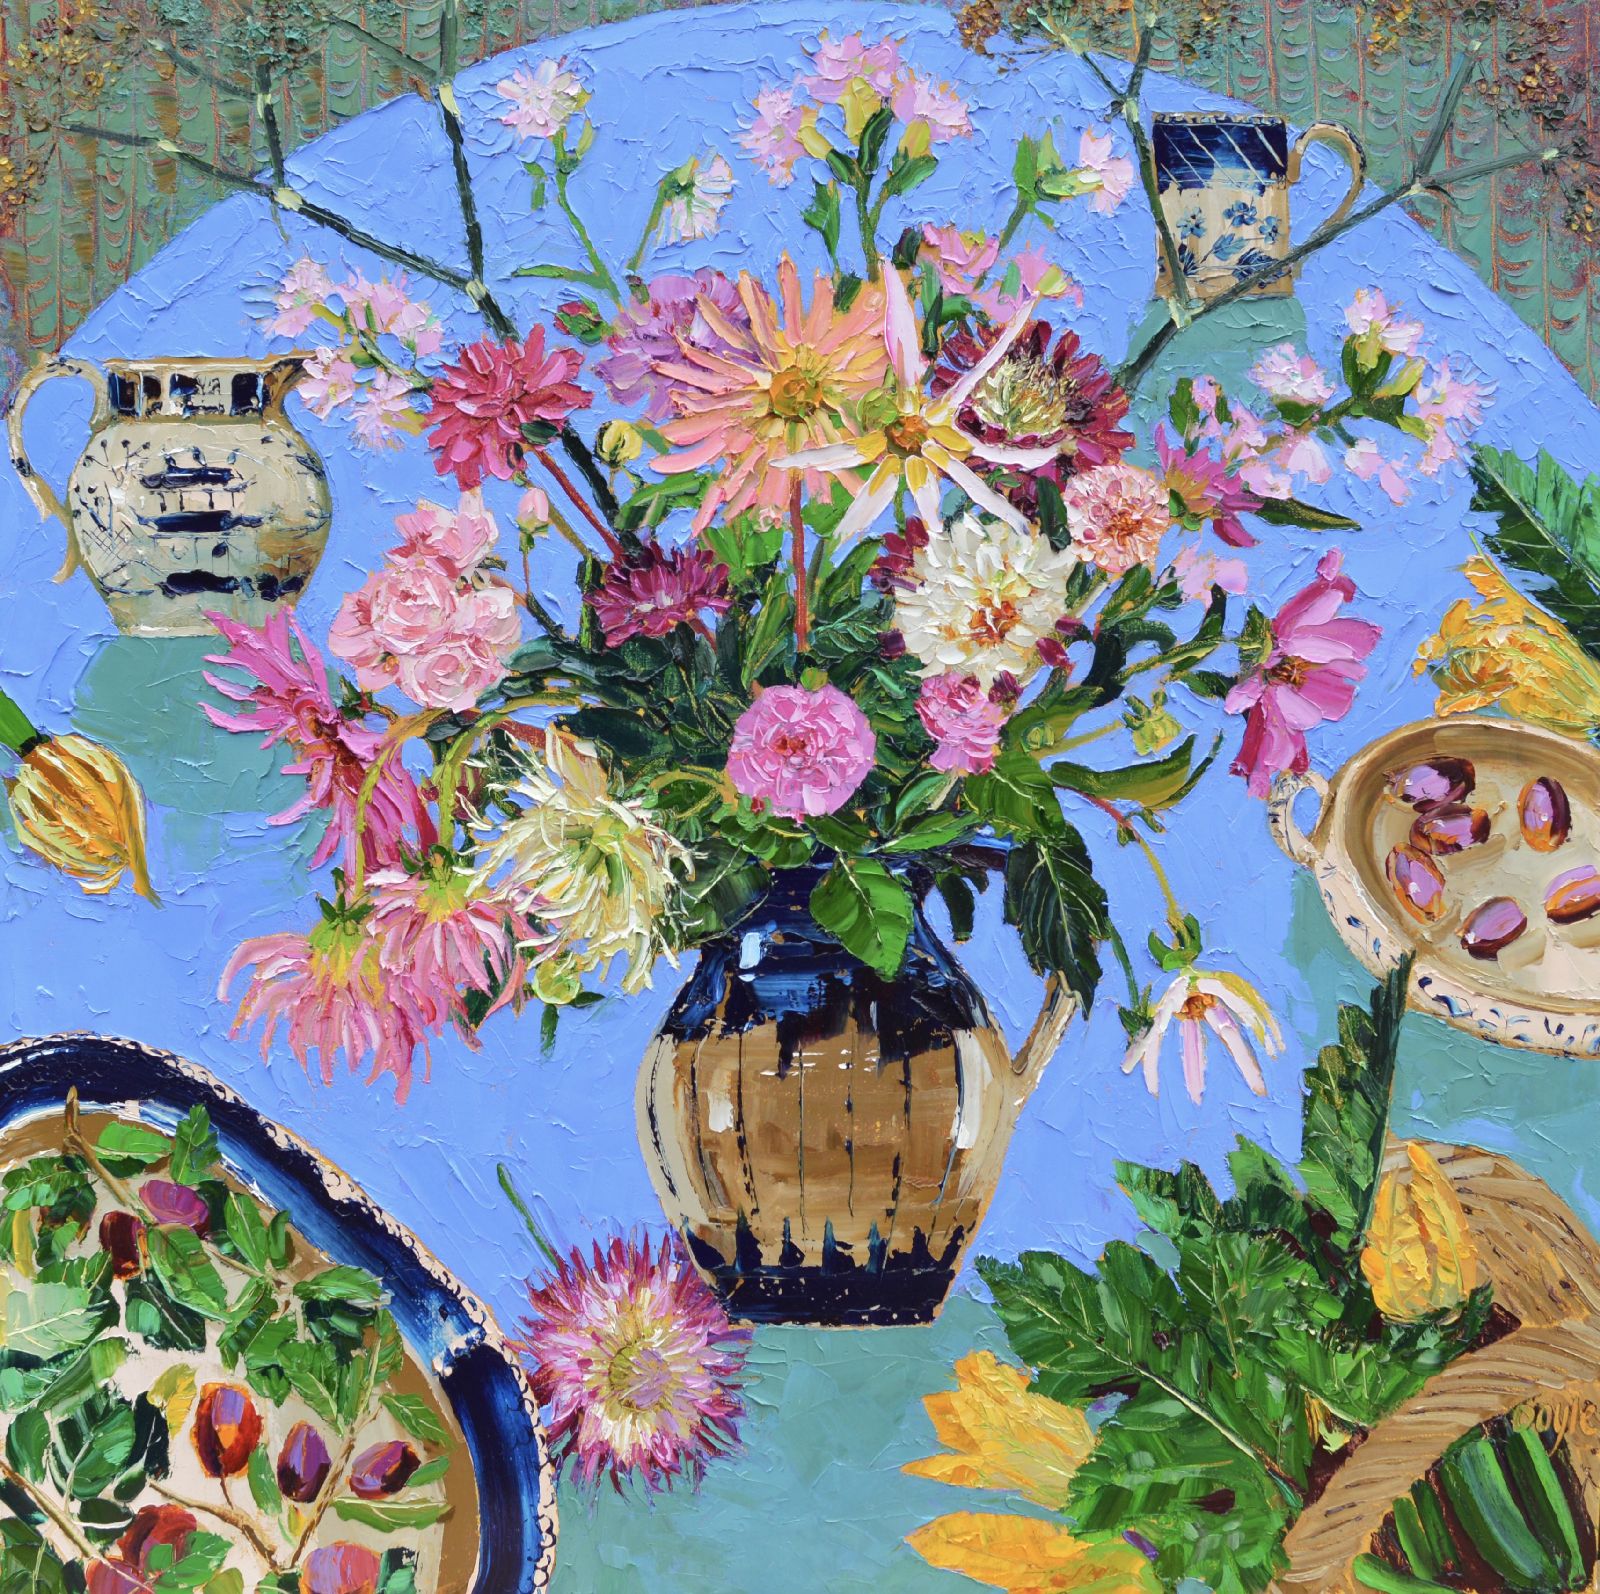 September Garden by Lucy Doyle